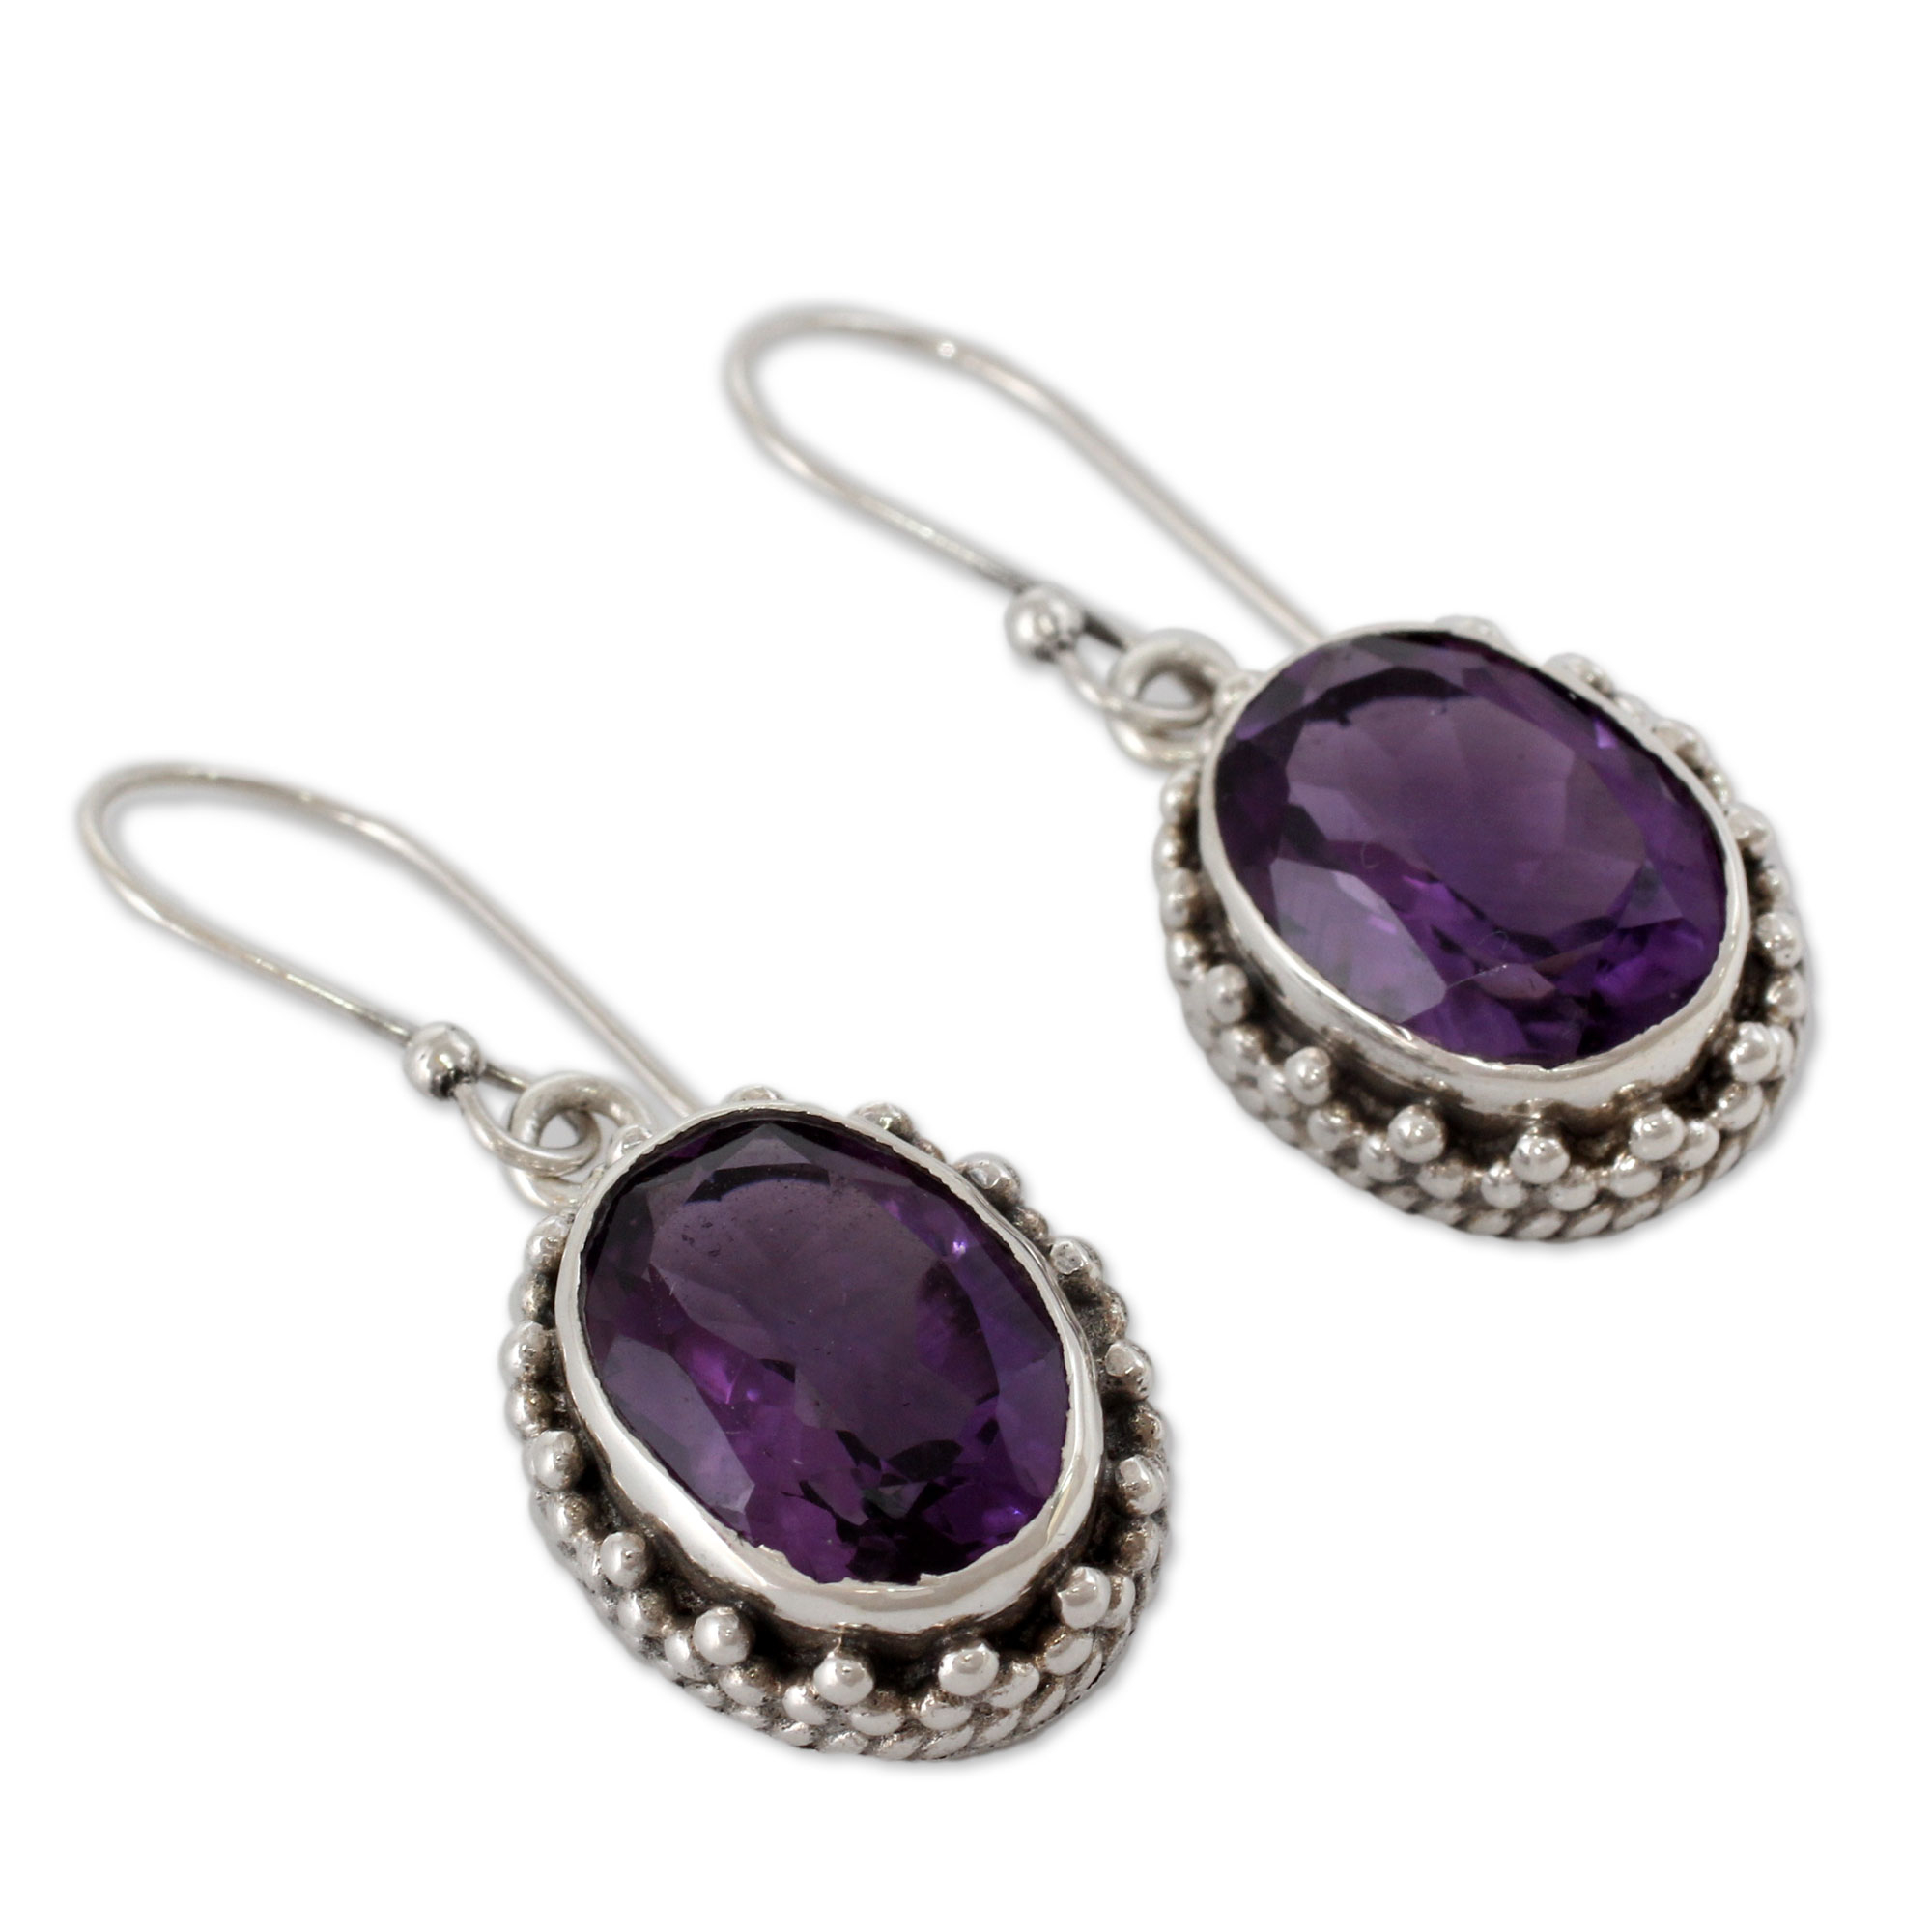 UNICEF Market | Handmade Sterling Silver and Amethyst Earrings from ...